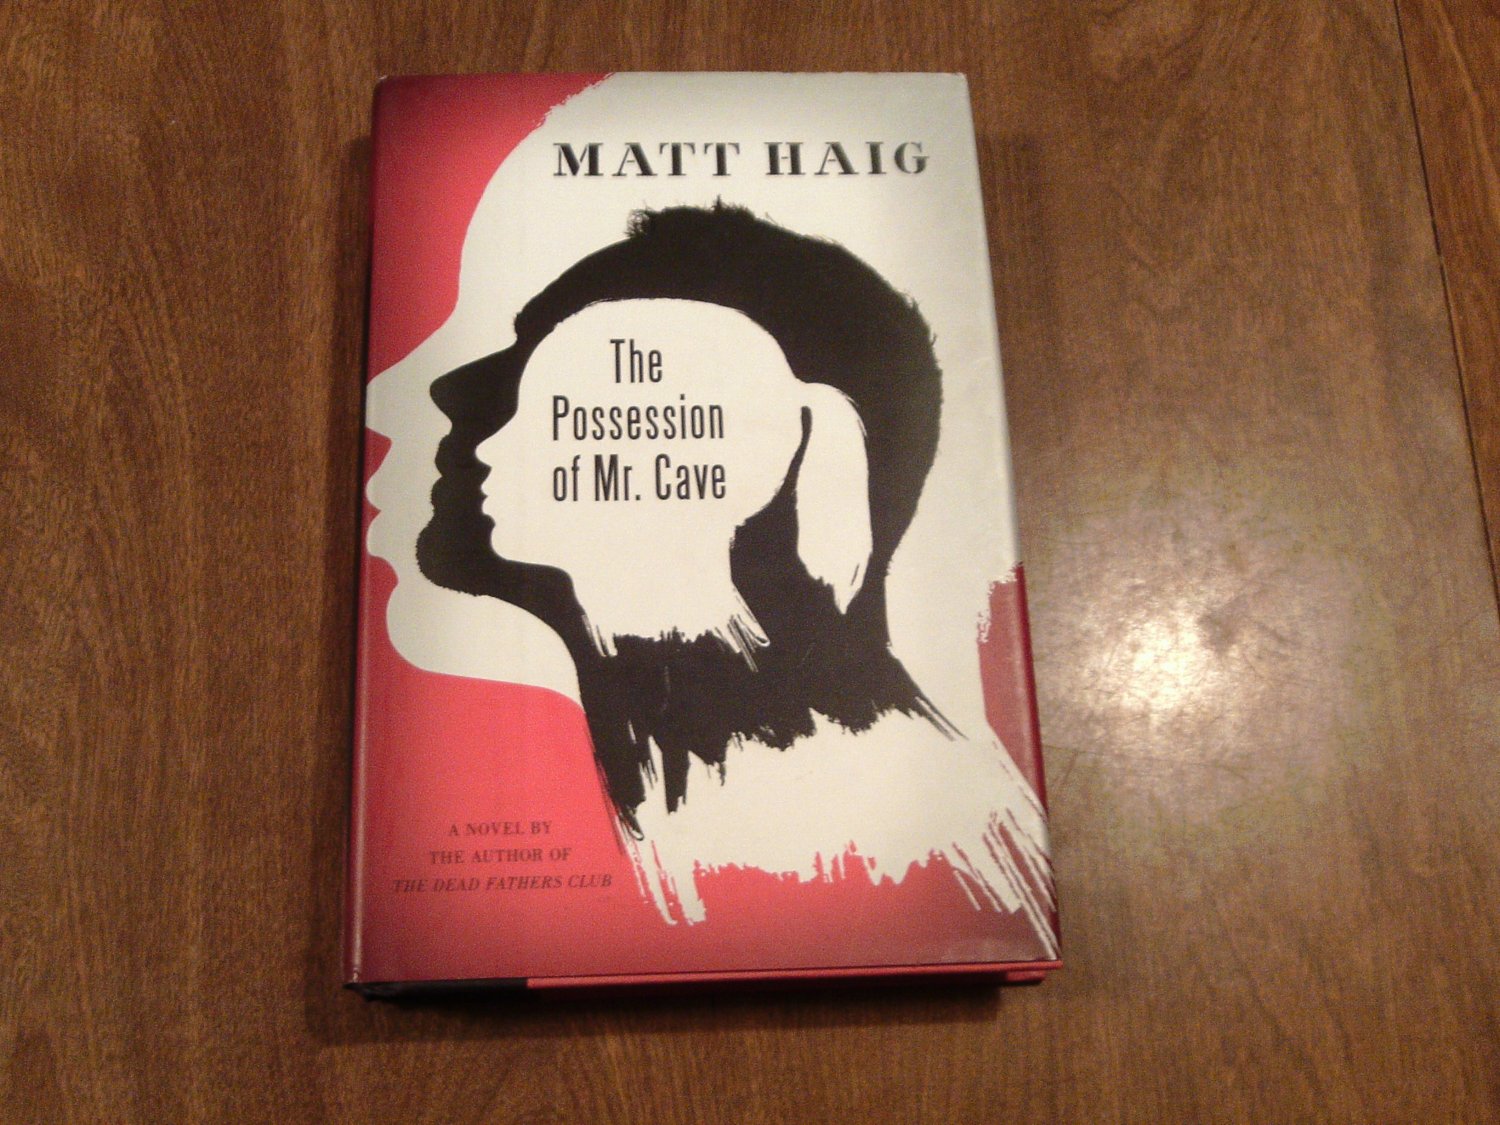 The Possession of Mr. Cave by Matt Haig (2008) (G6A) Family, Thriller, Contemporary